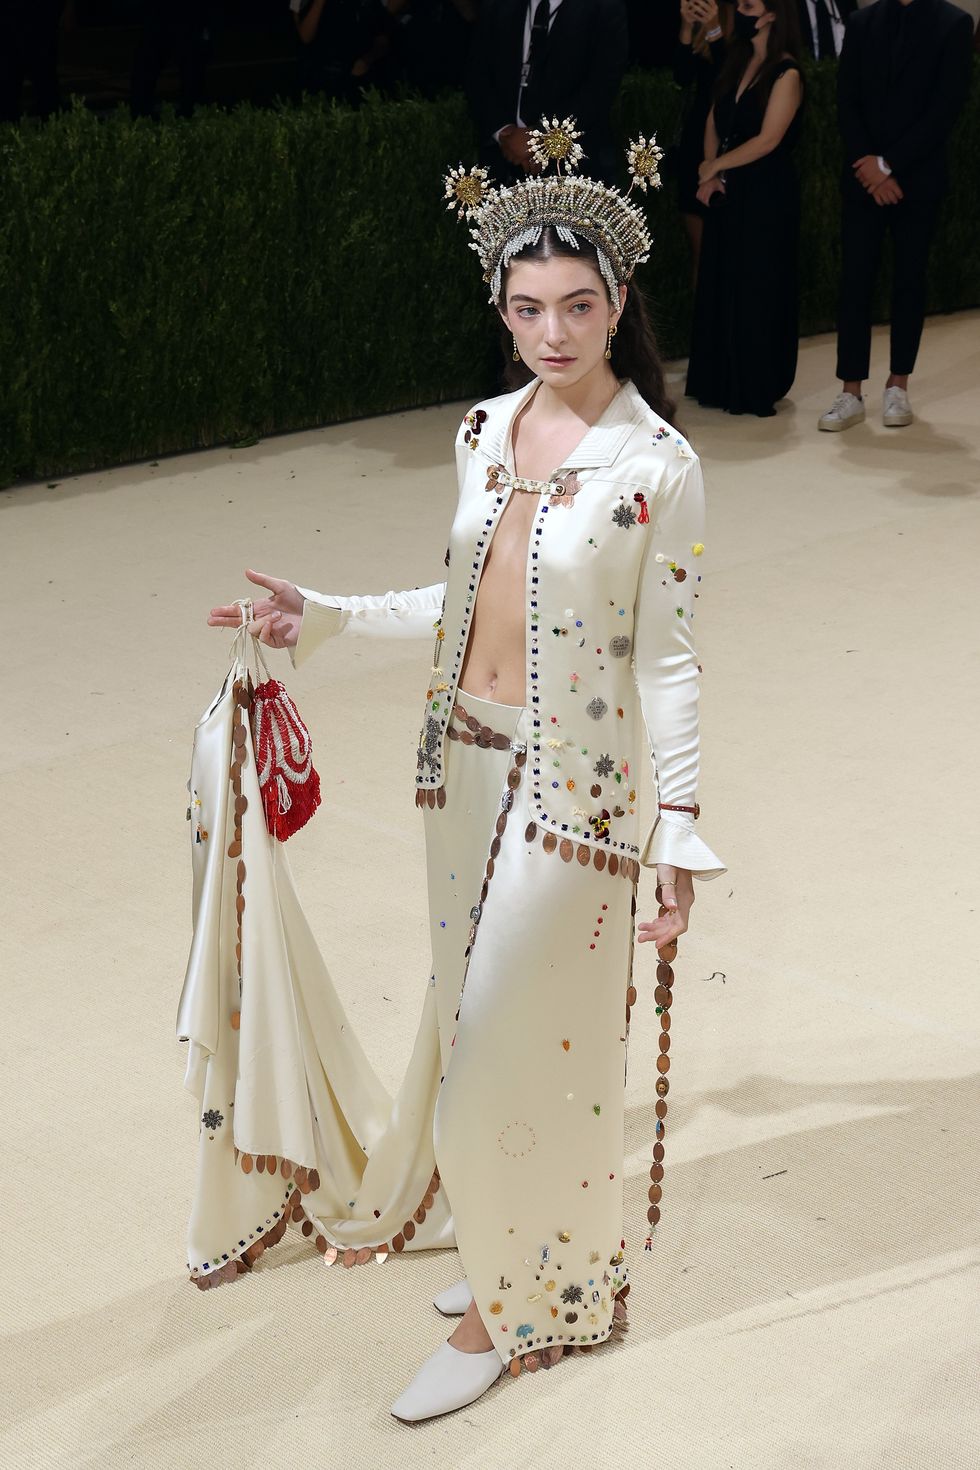 met gala 2021, which celebrates the lexicon of fashion arrivals in America